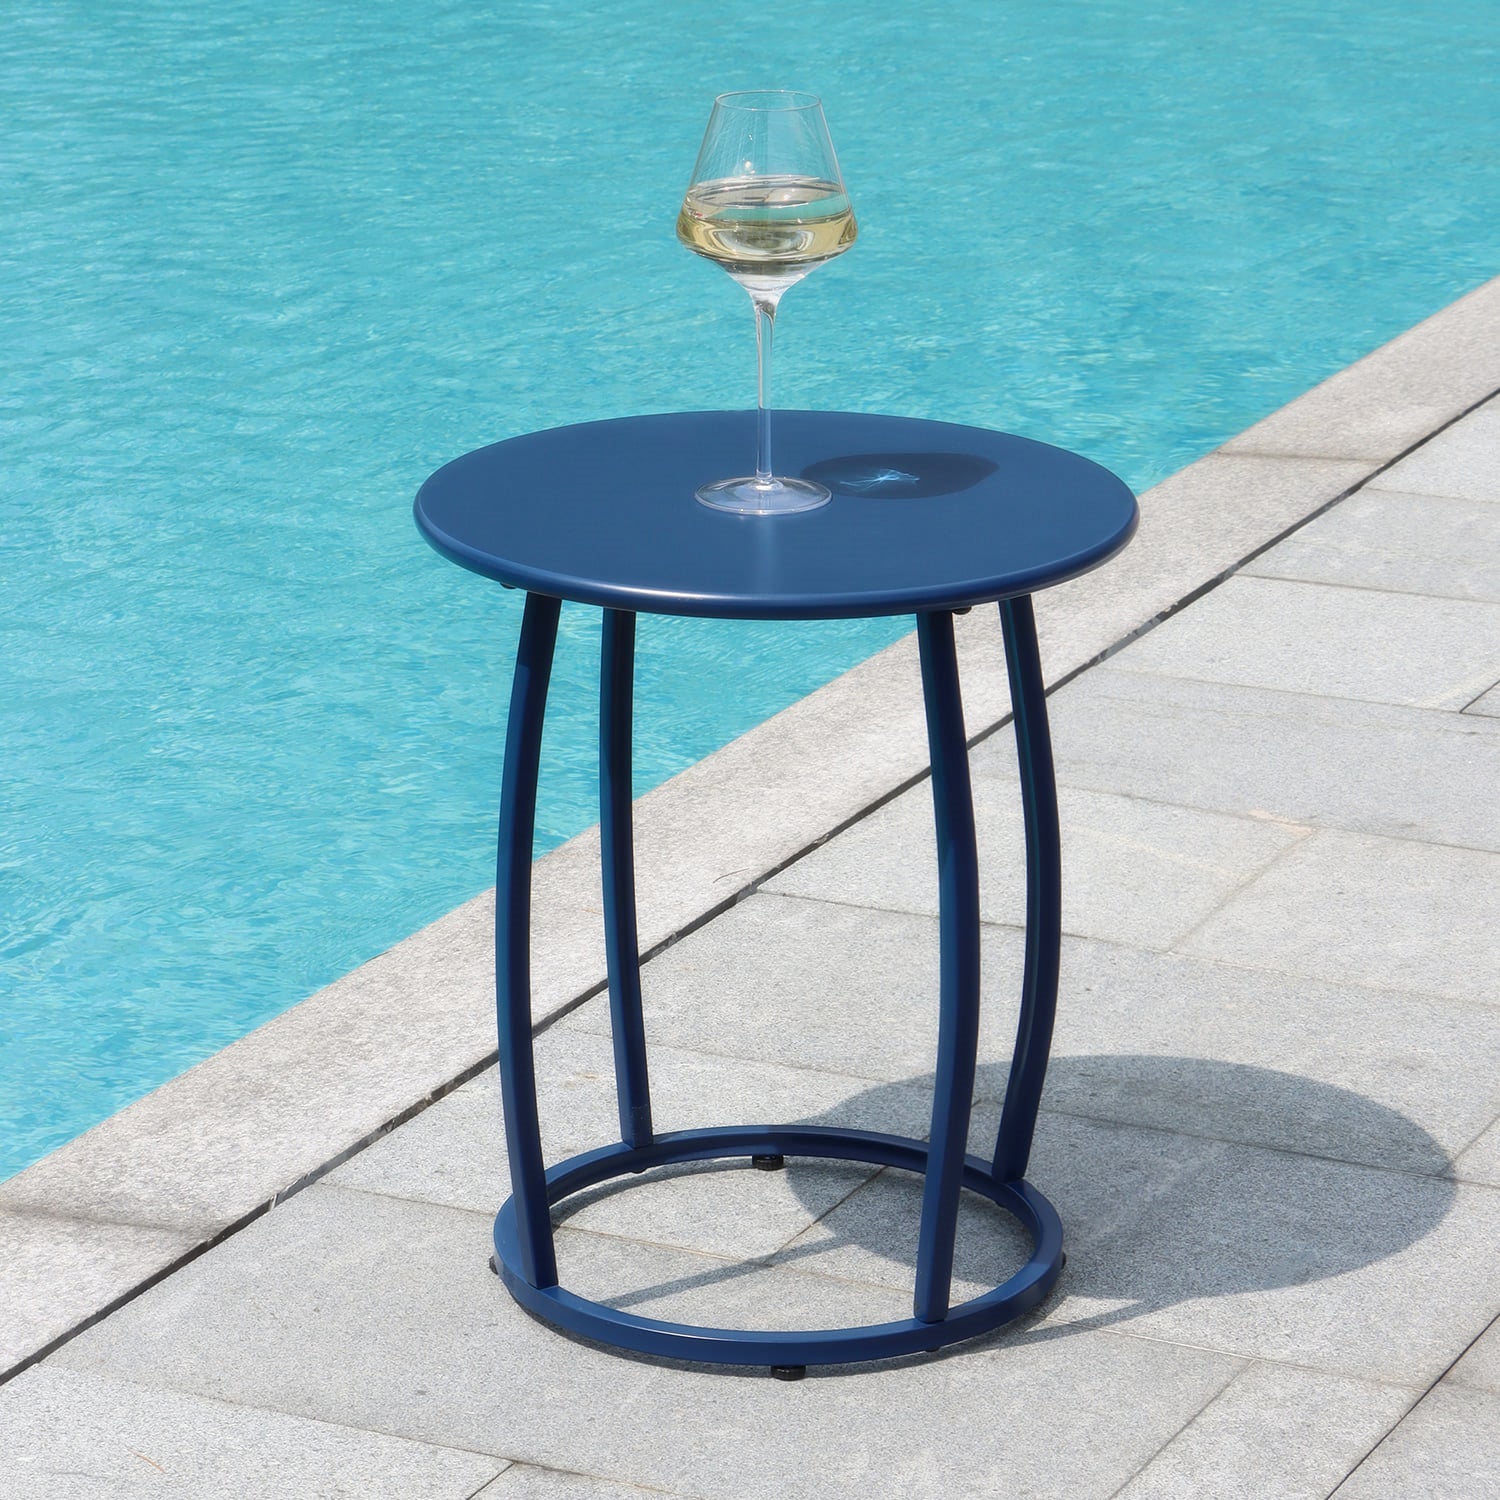 outdoor side table black white blue patio side table round metal small outdoor side table outside table square metal outdoor side table outdoor side table with storage small patio side table round black metal outdoor side table